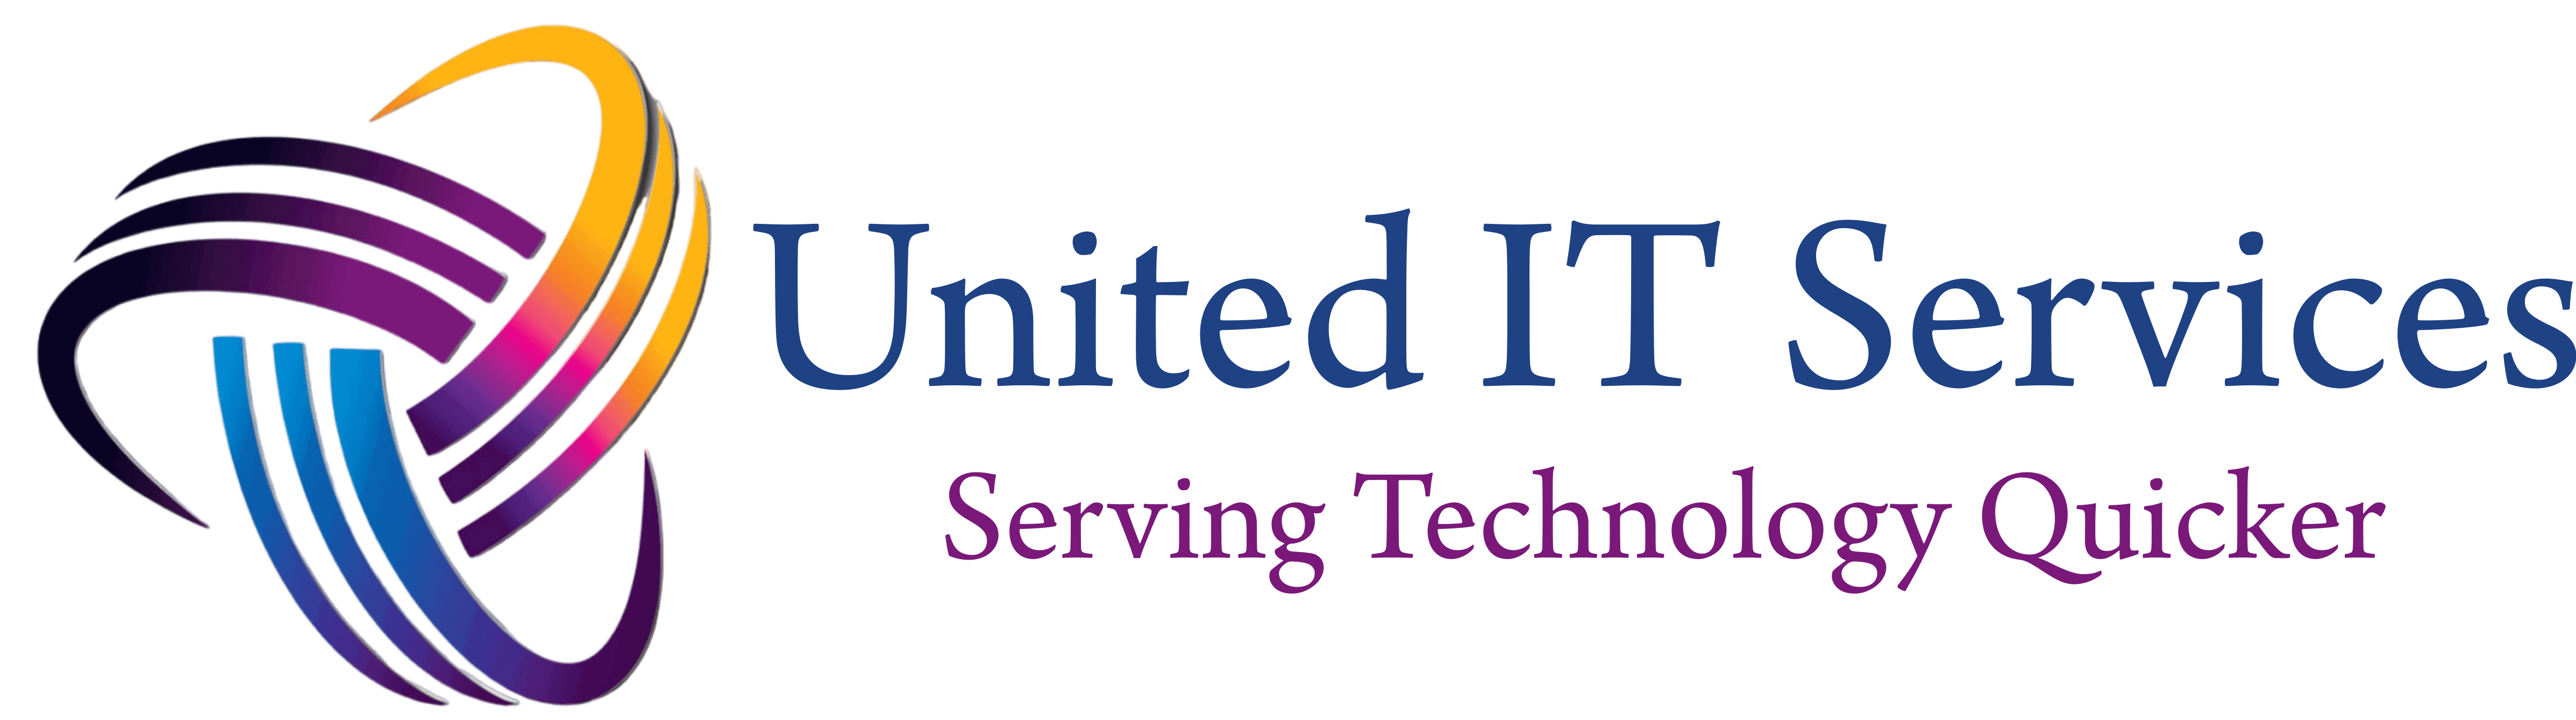 United IT Services